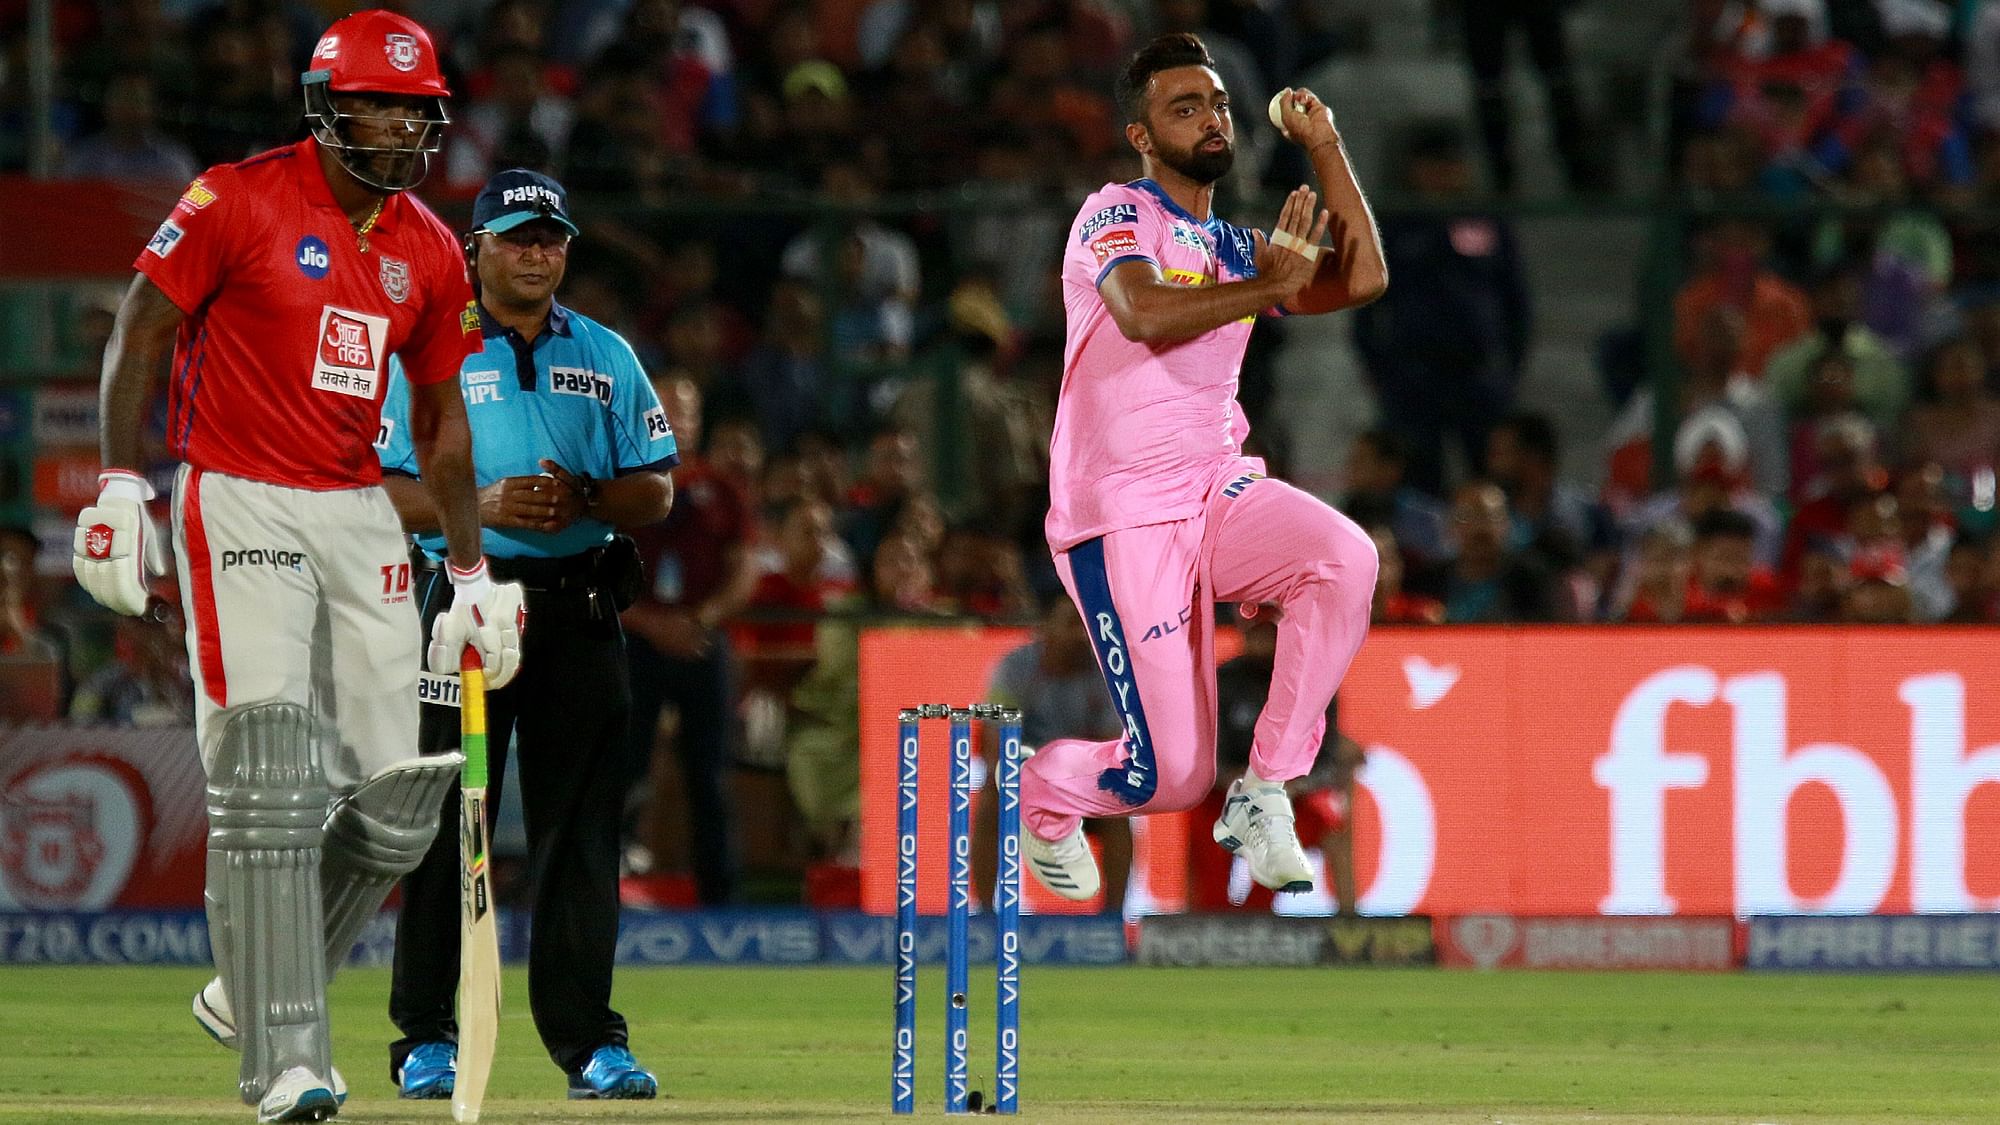 Jaydev Unadkat said the Mankading incident hasn’t affected the mood of the Rajasthan Royals camp.